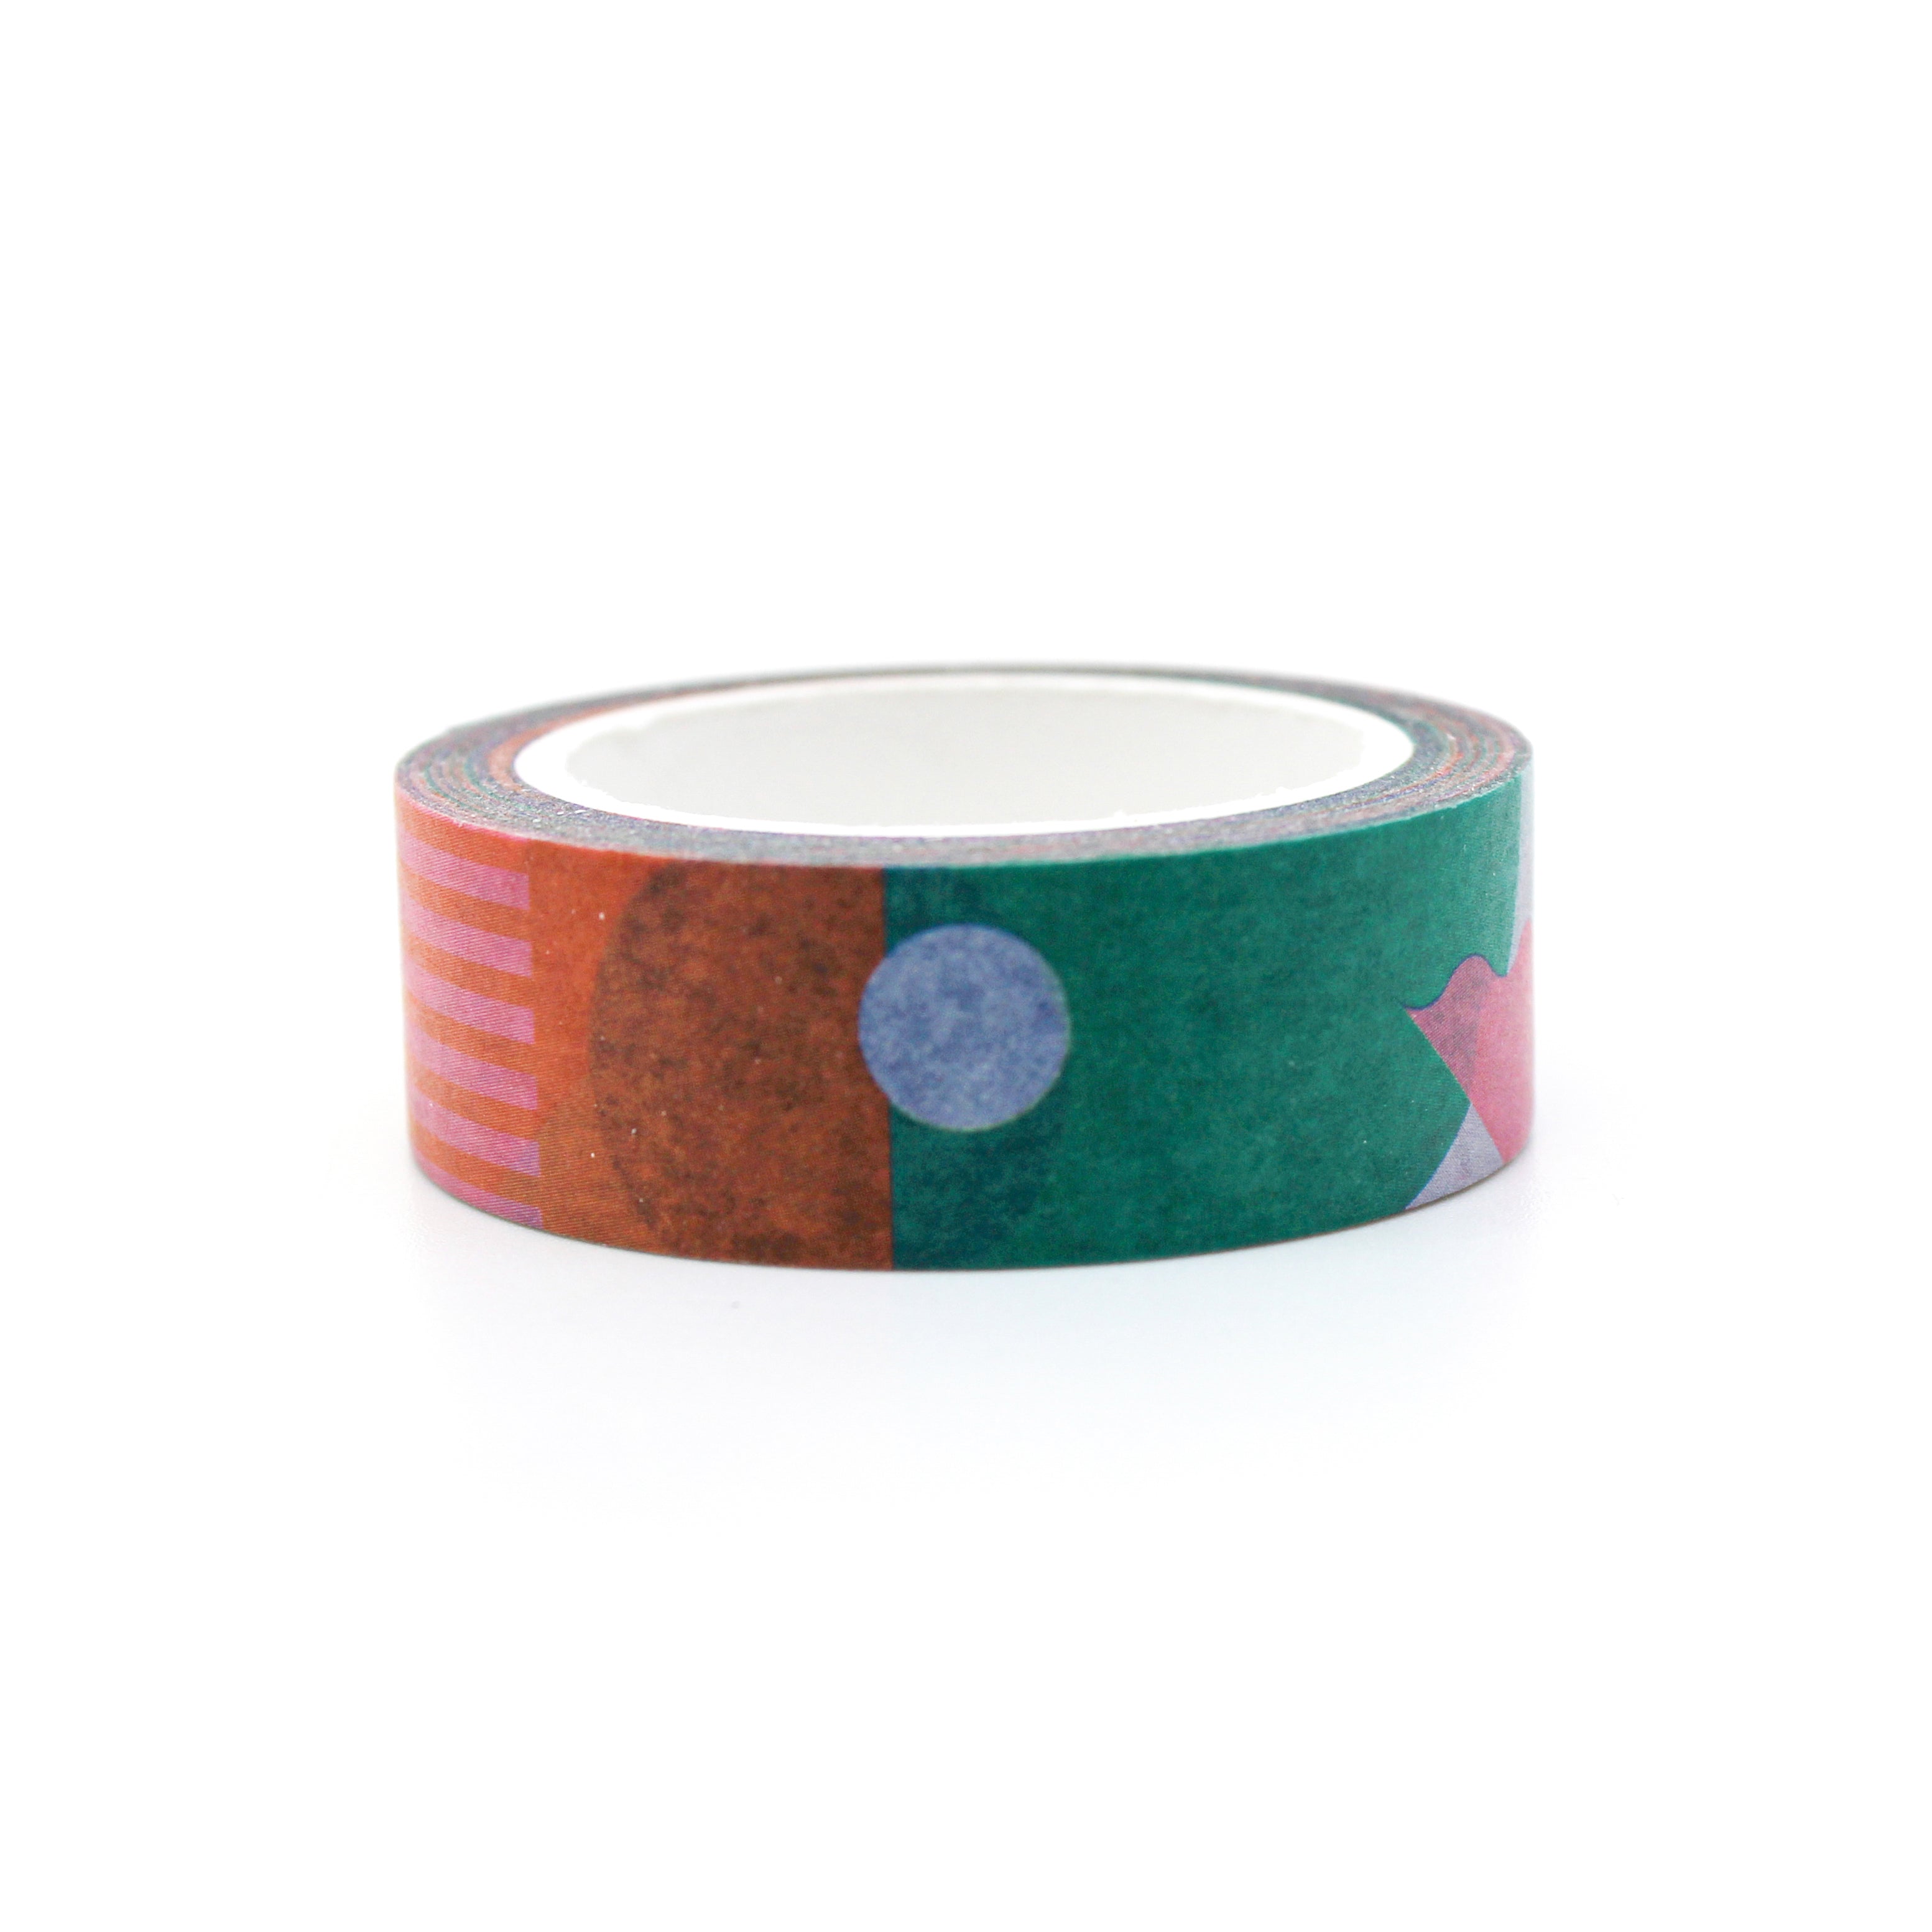 This is view of pink Miami City pattern washi tape from BBB Supplies Craft Shop